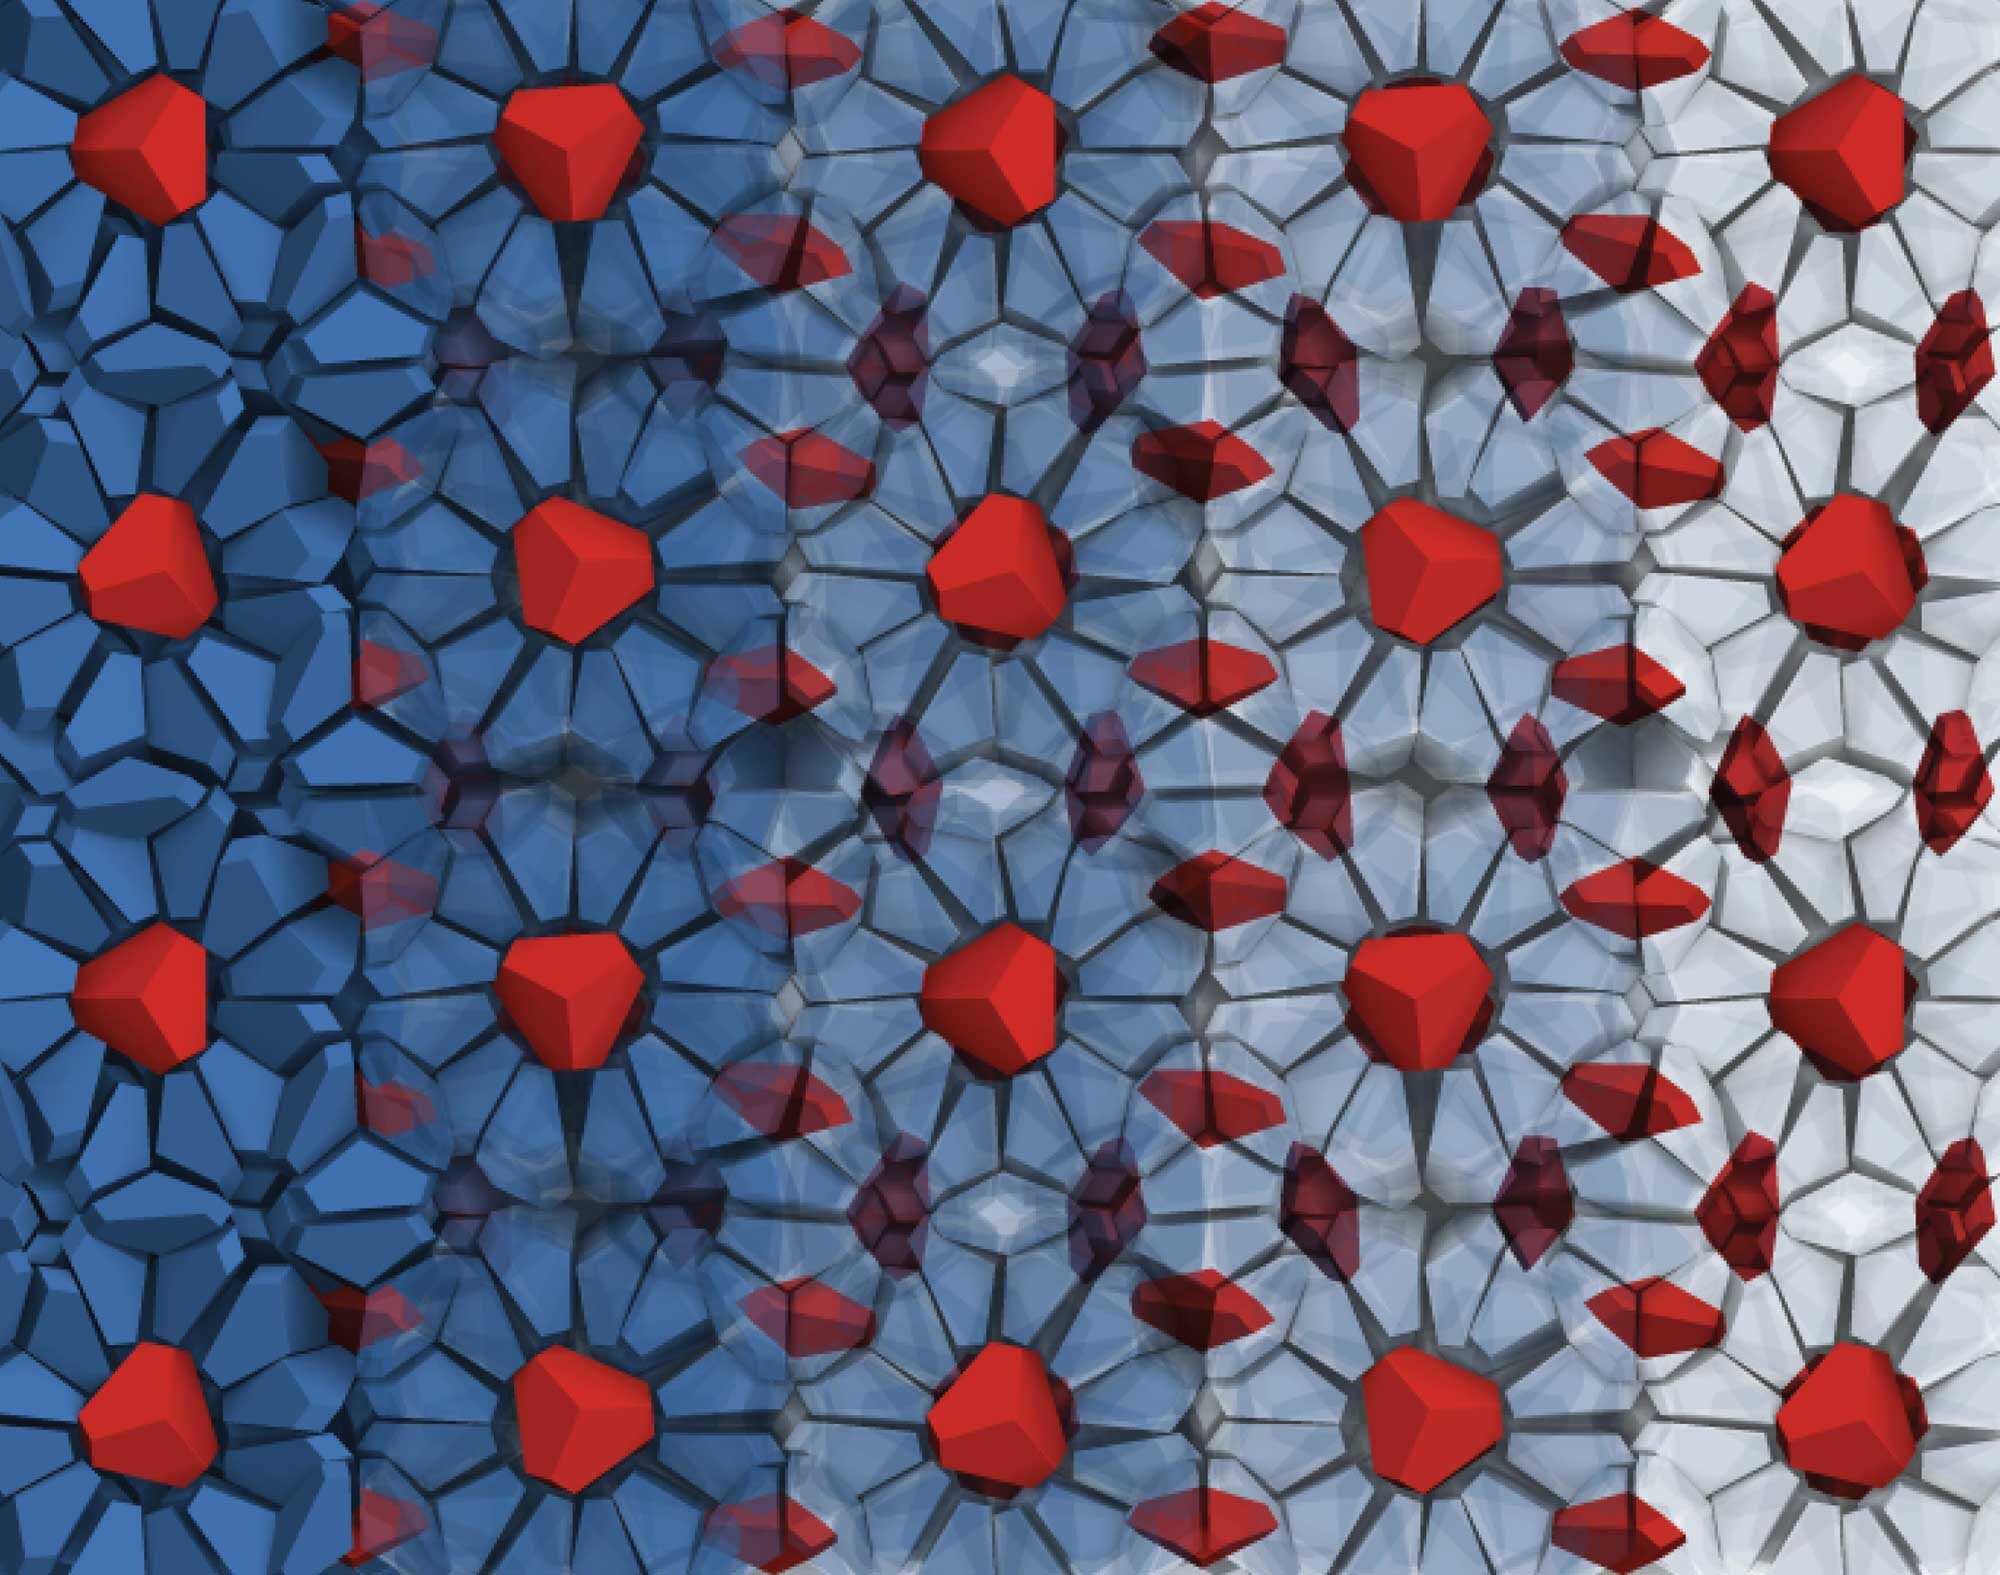 The cages of the host network of bipyramid particles are shown in blue on the left side, becoming increasingly transparent toward the right. The red bipyramid particles are guest particles, trapped in the cages of the clathrate structure